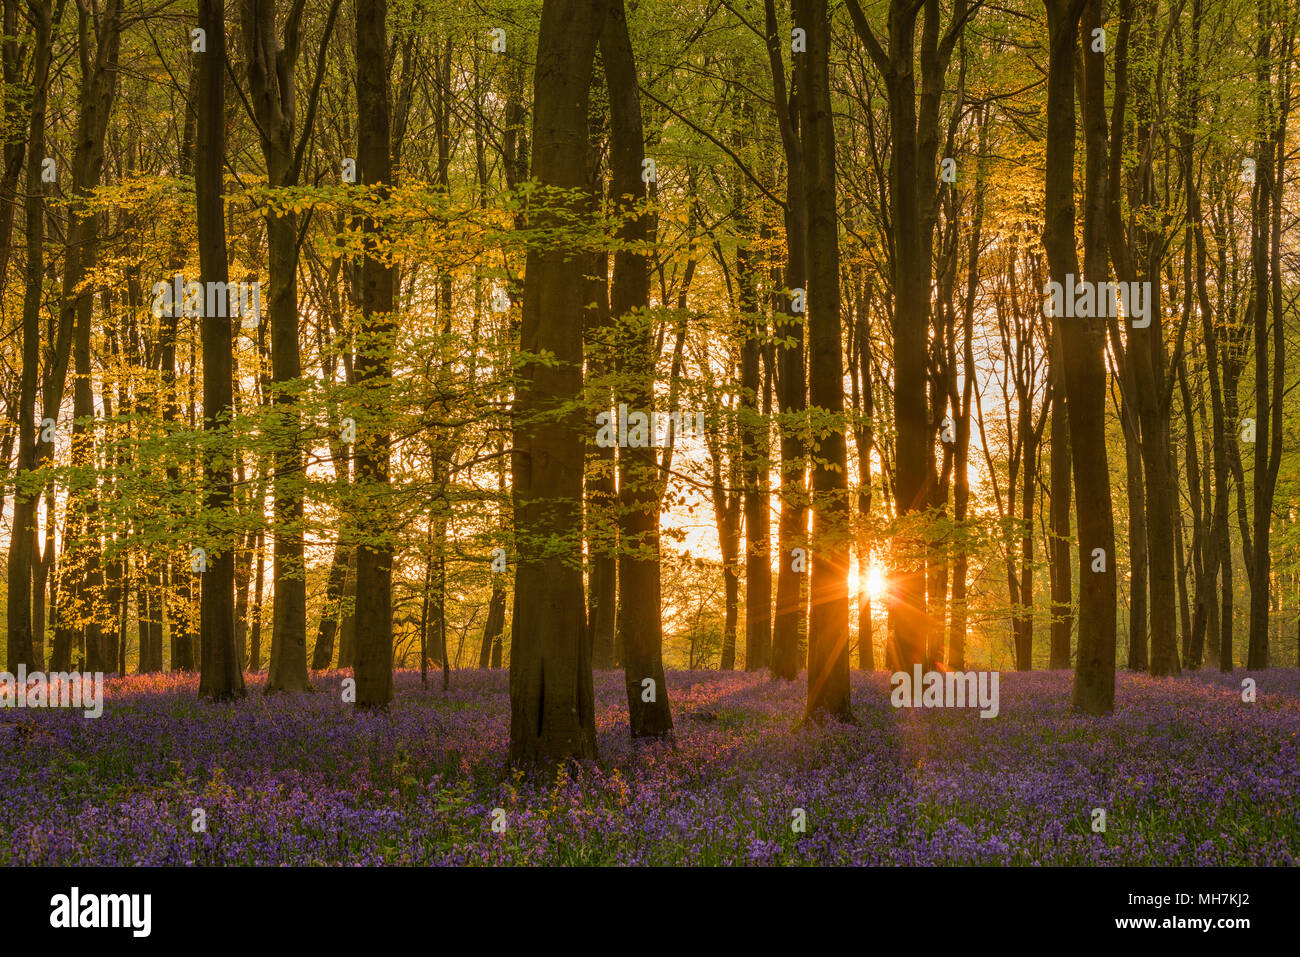 Dawn in a Hampshire woodland full of Beech trees and native Englsih Bluebells as sunrise bursts through the canopy at dawn. Stock Photo